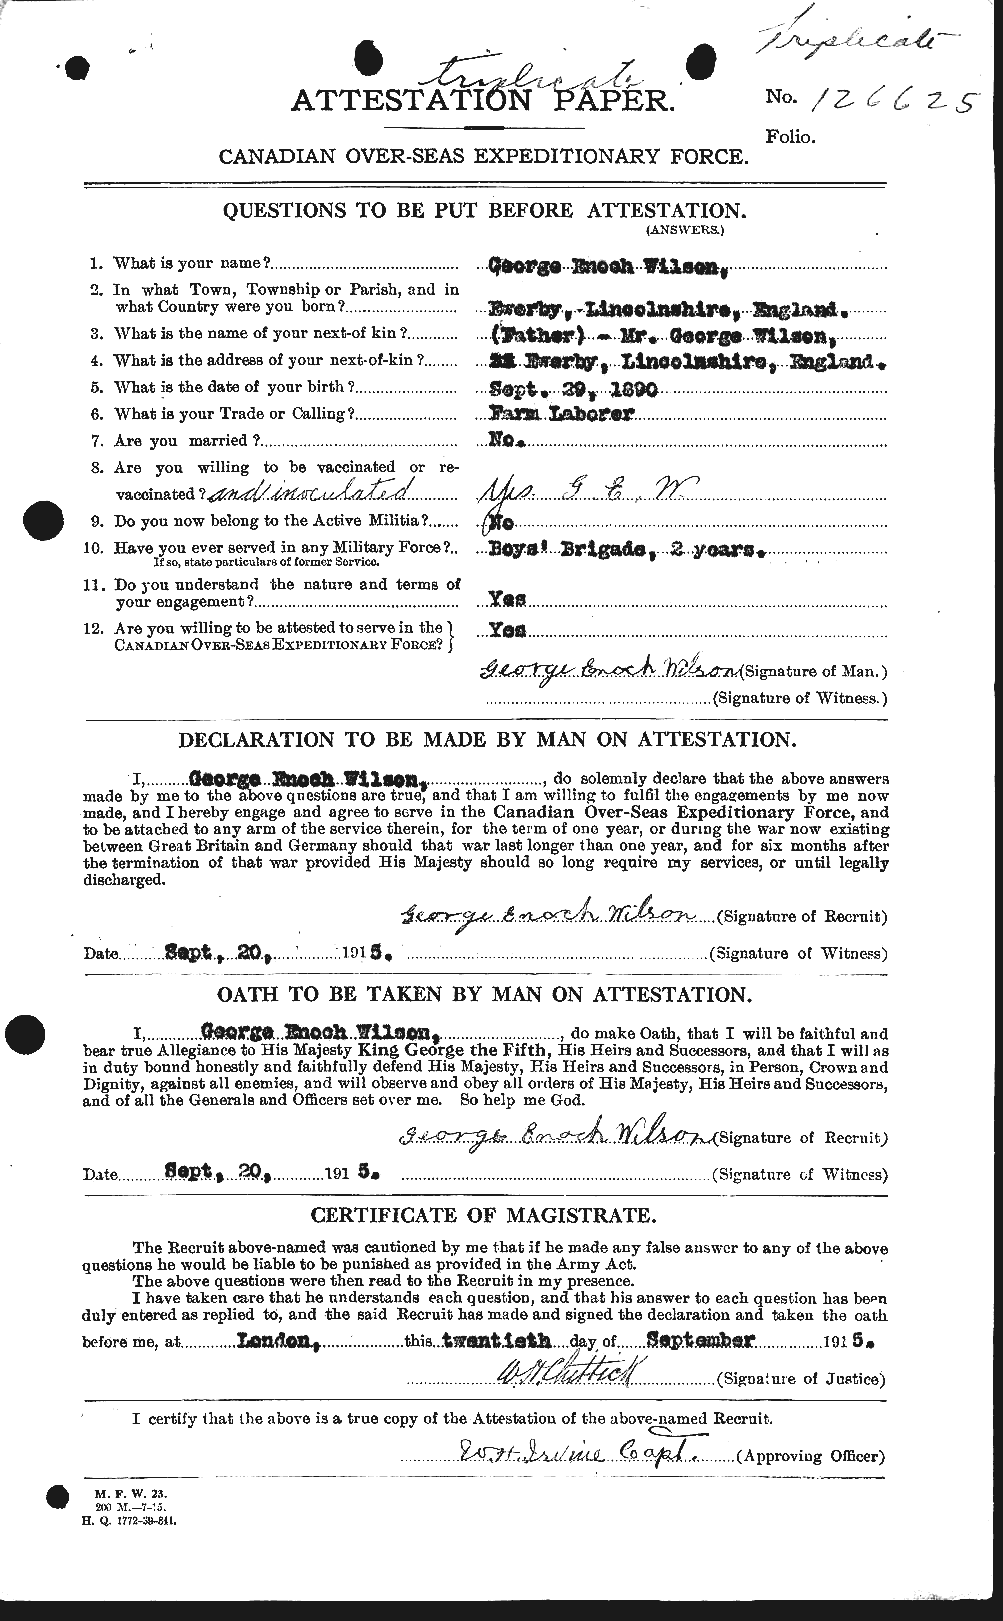 Personnel Records of the First World War - CEF 679279a